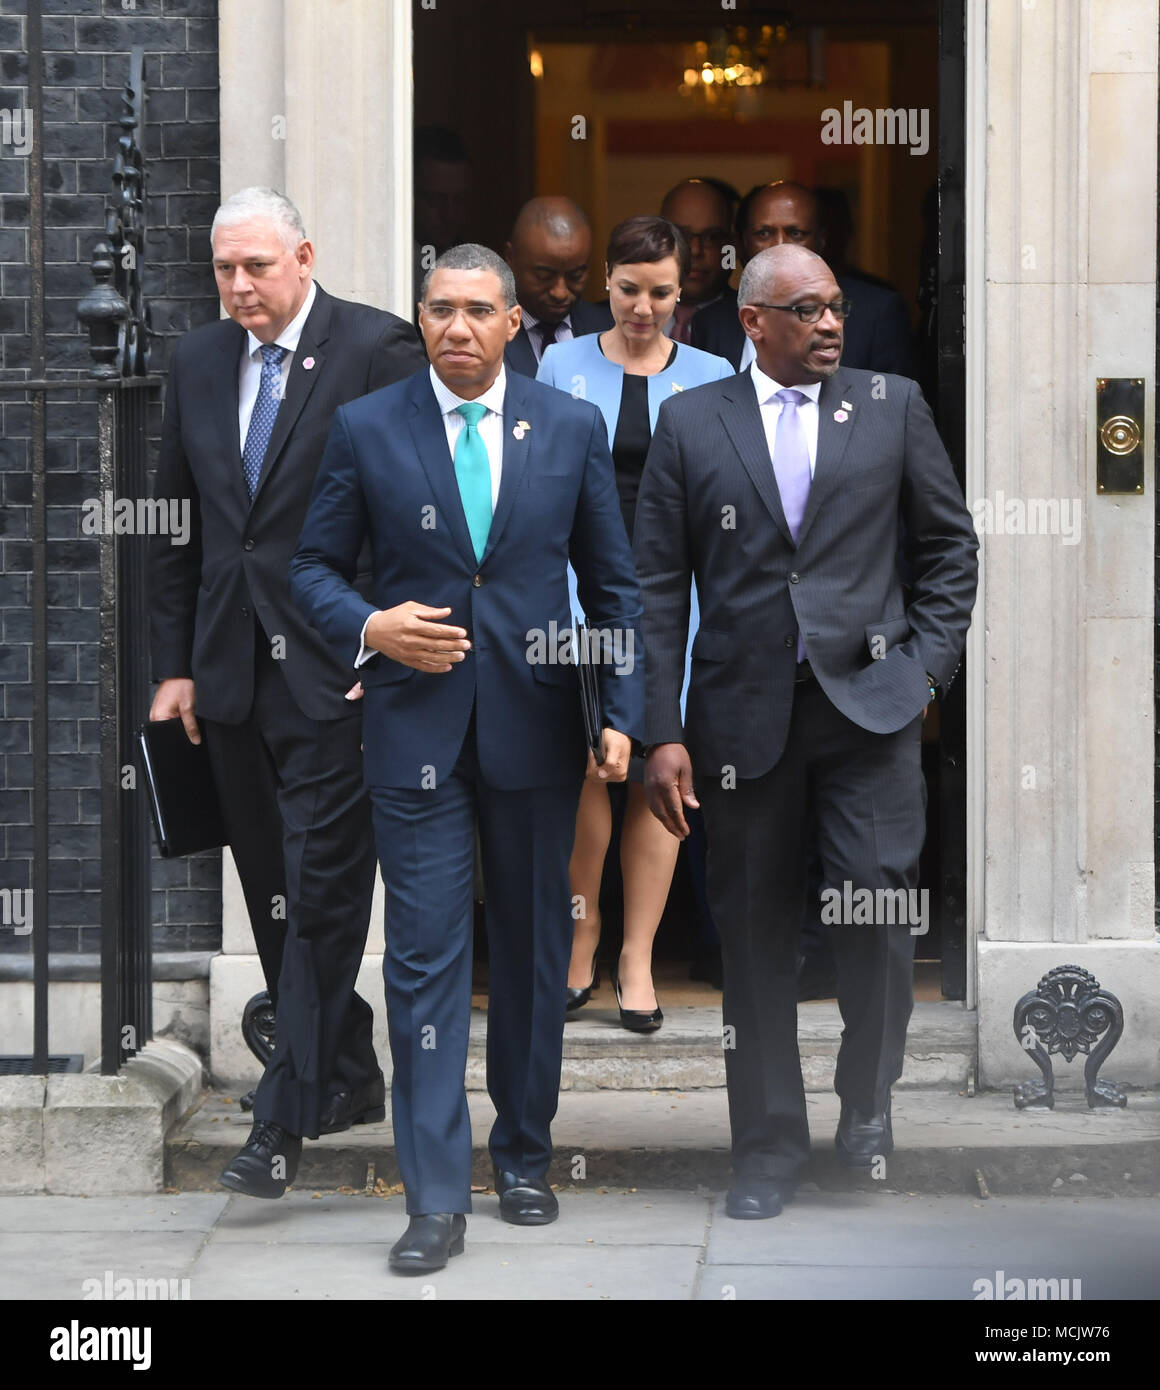 The Prime Minister of Jamaica Andrew Holness, with other members of the delgation, leaving 10 Downing Street after the meeting with Prime Minister Theresa May in relation to the Windrush generation immigration controversy. Stock Photo